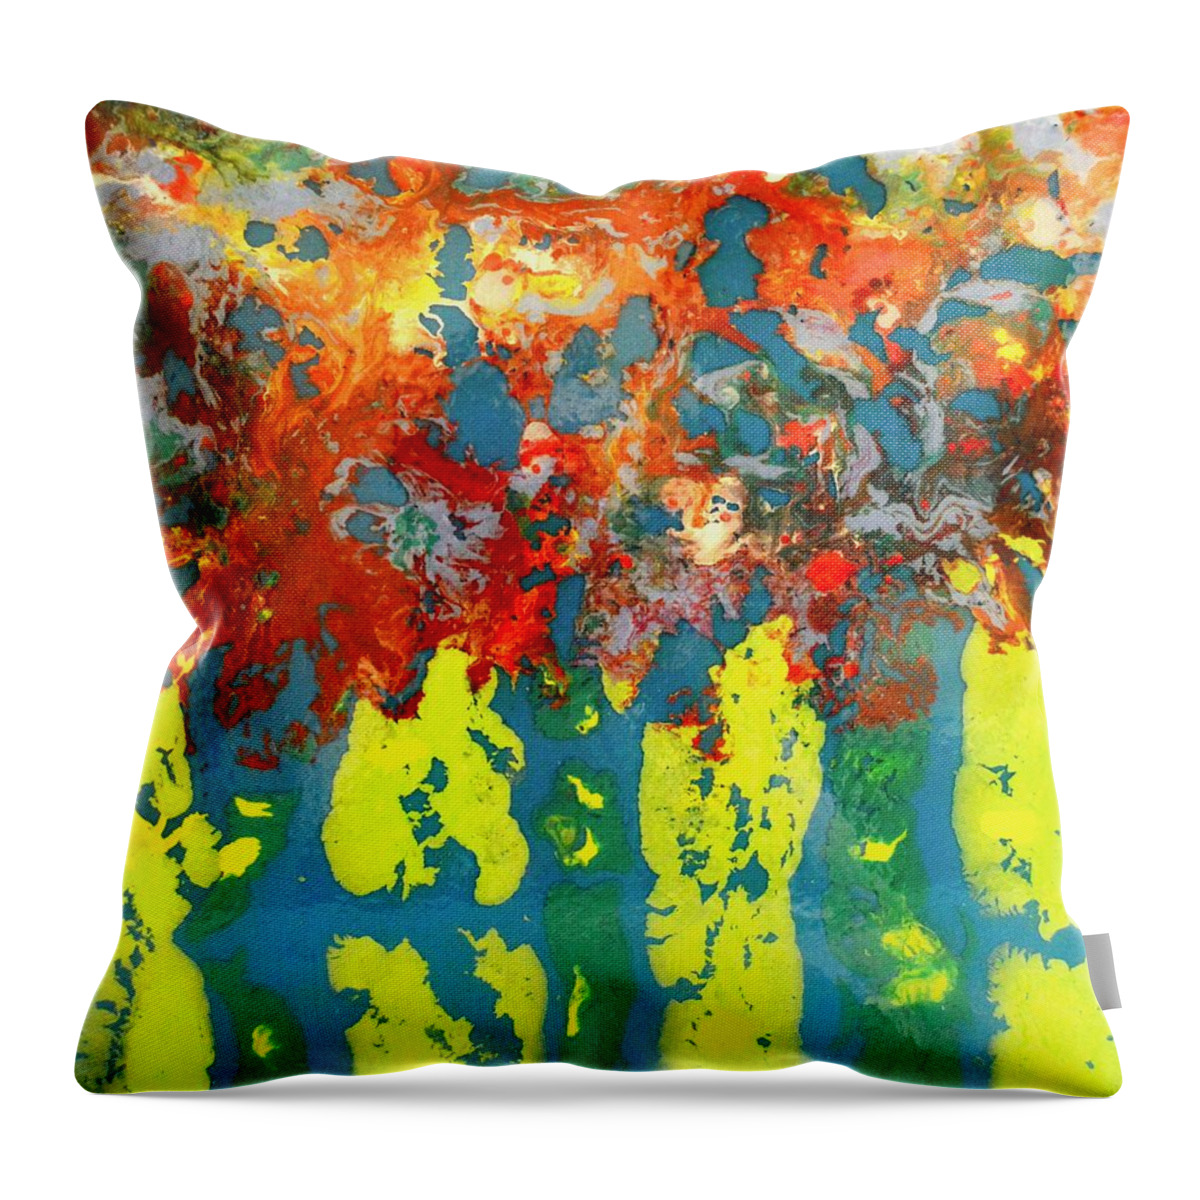 Ghost Throw Pillow featuring the mixed media Ghost Tree by MiMi Stirn